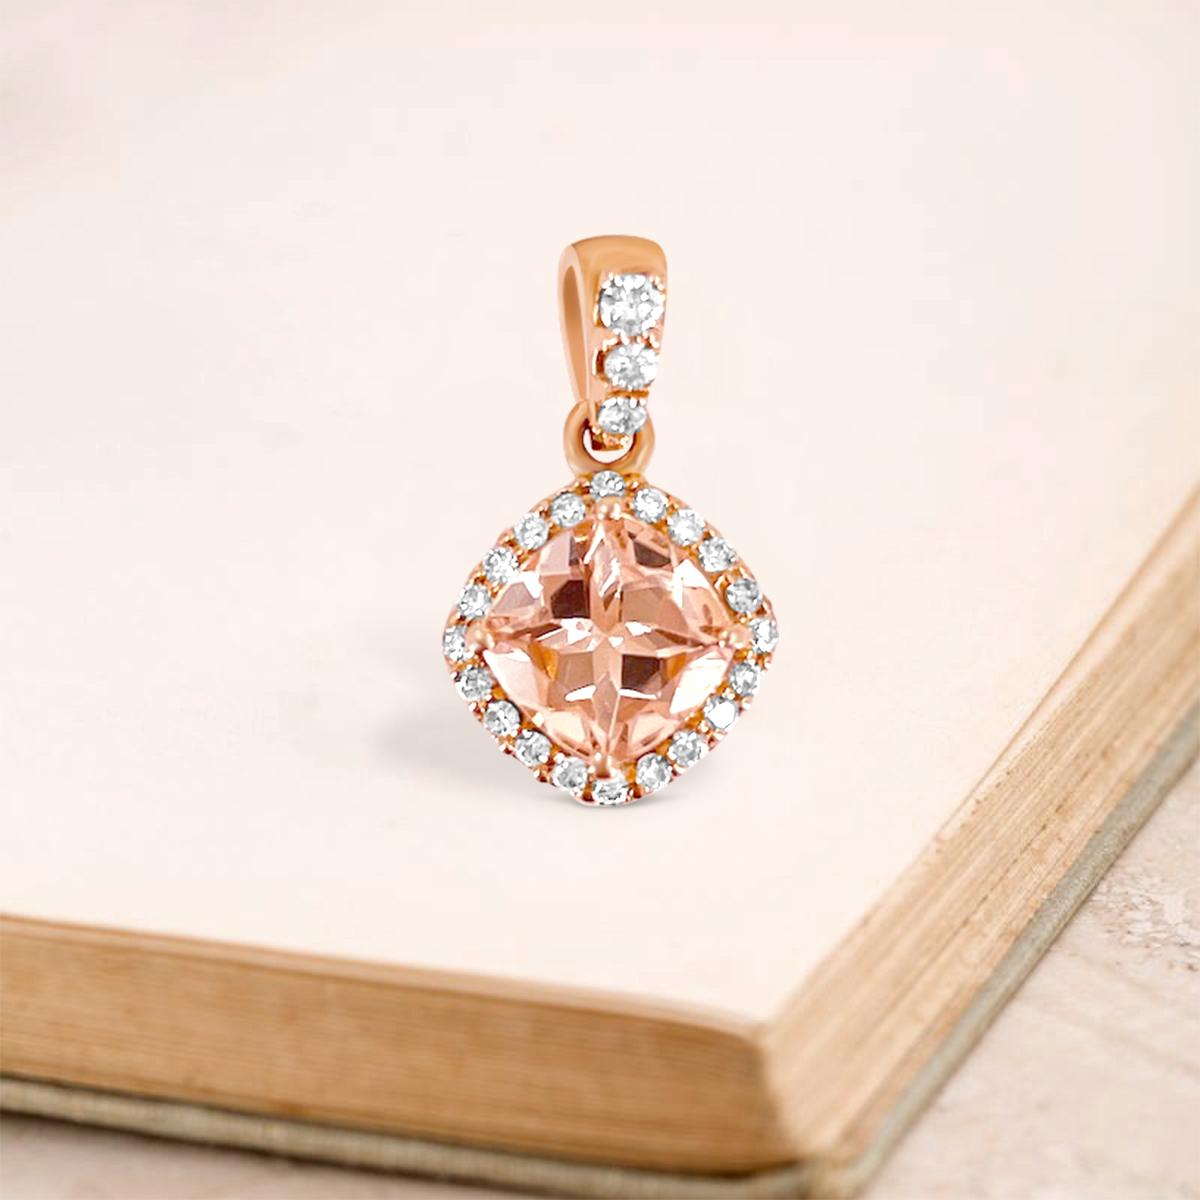 Fine Cut Cushion Shaped 6mm Morganite and Diamond Pendant Set in 14K Rose Gold Commands Attention. This Brilliant Piece of Morganite Gemstone Pendant Provides a Luminous Finished Look.


Style# TS1076P
Morganite: Cushion 6mm 0.81cts
Diamonds: 23pcs